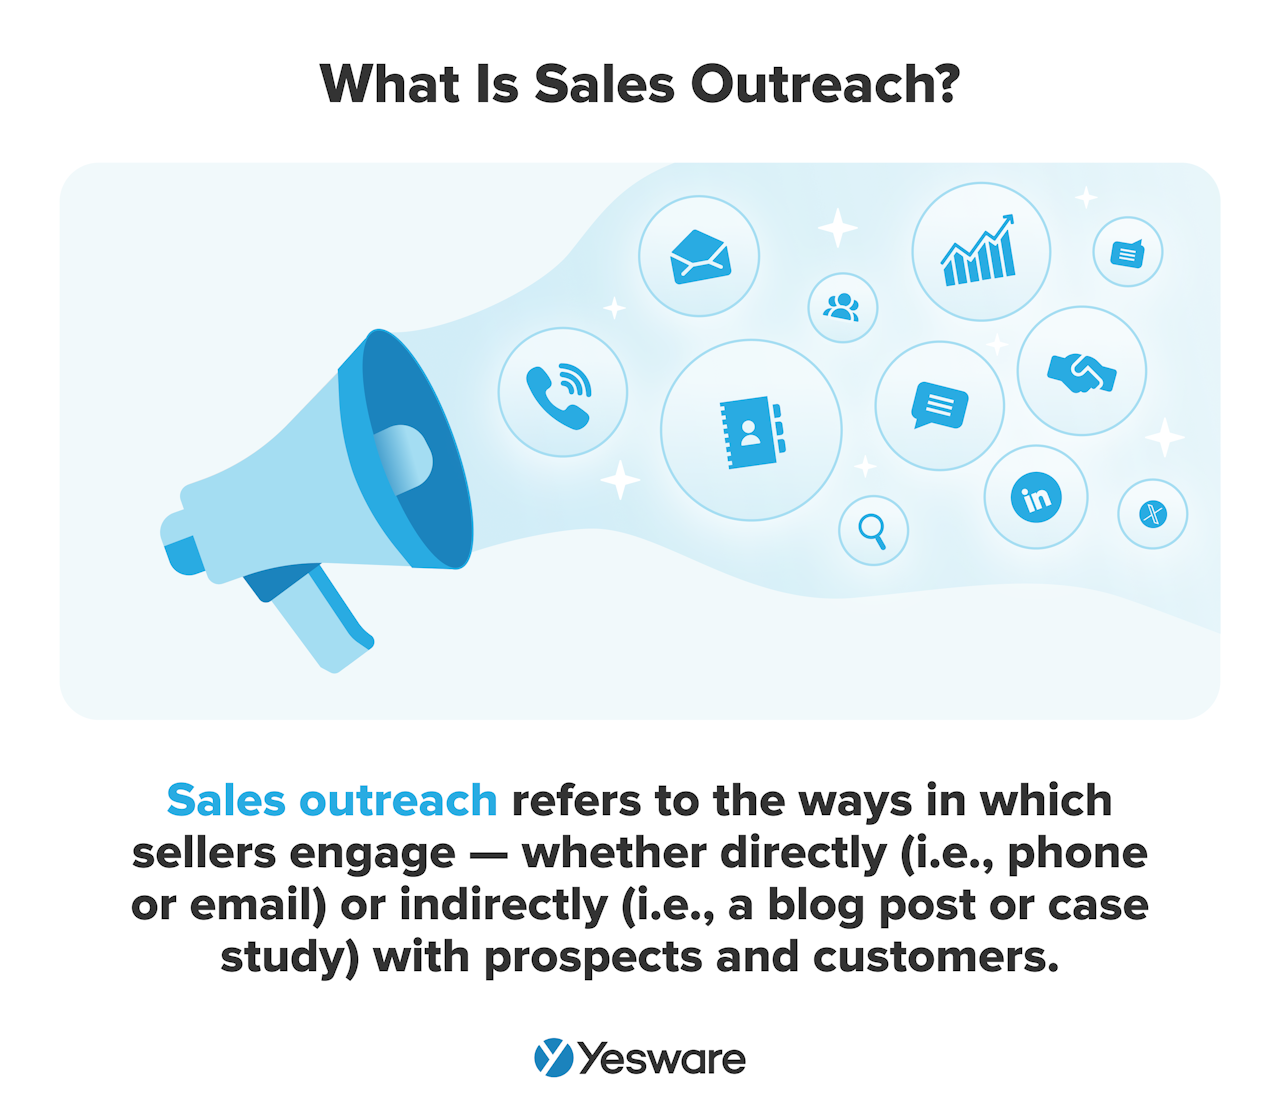 What is sales outreach?